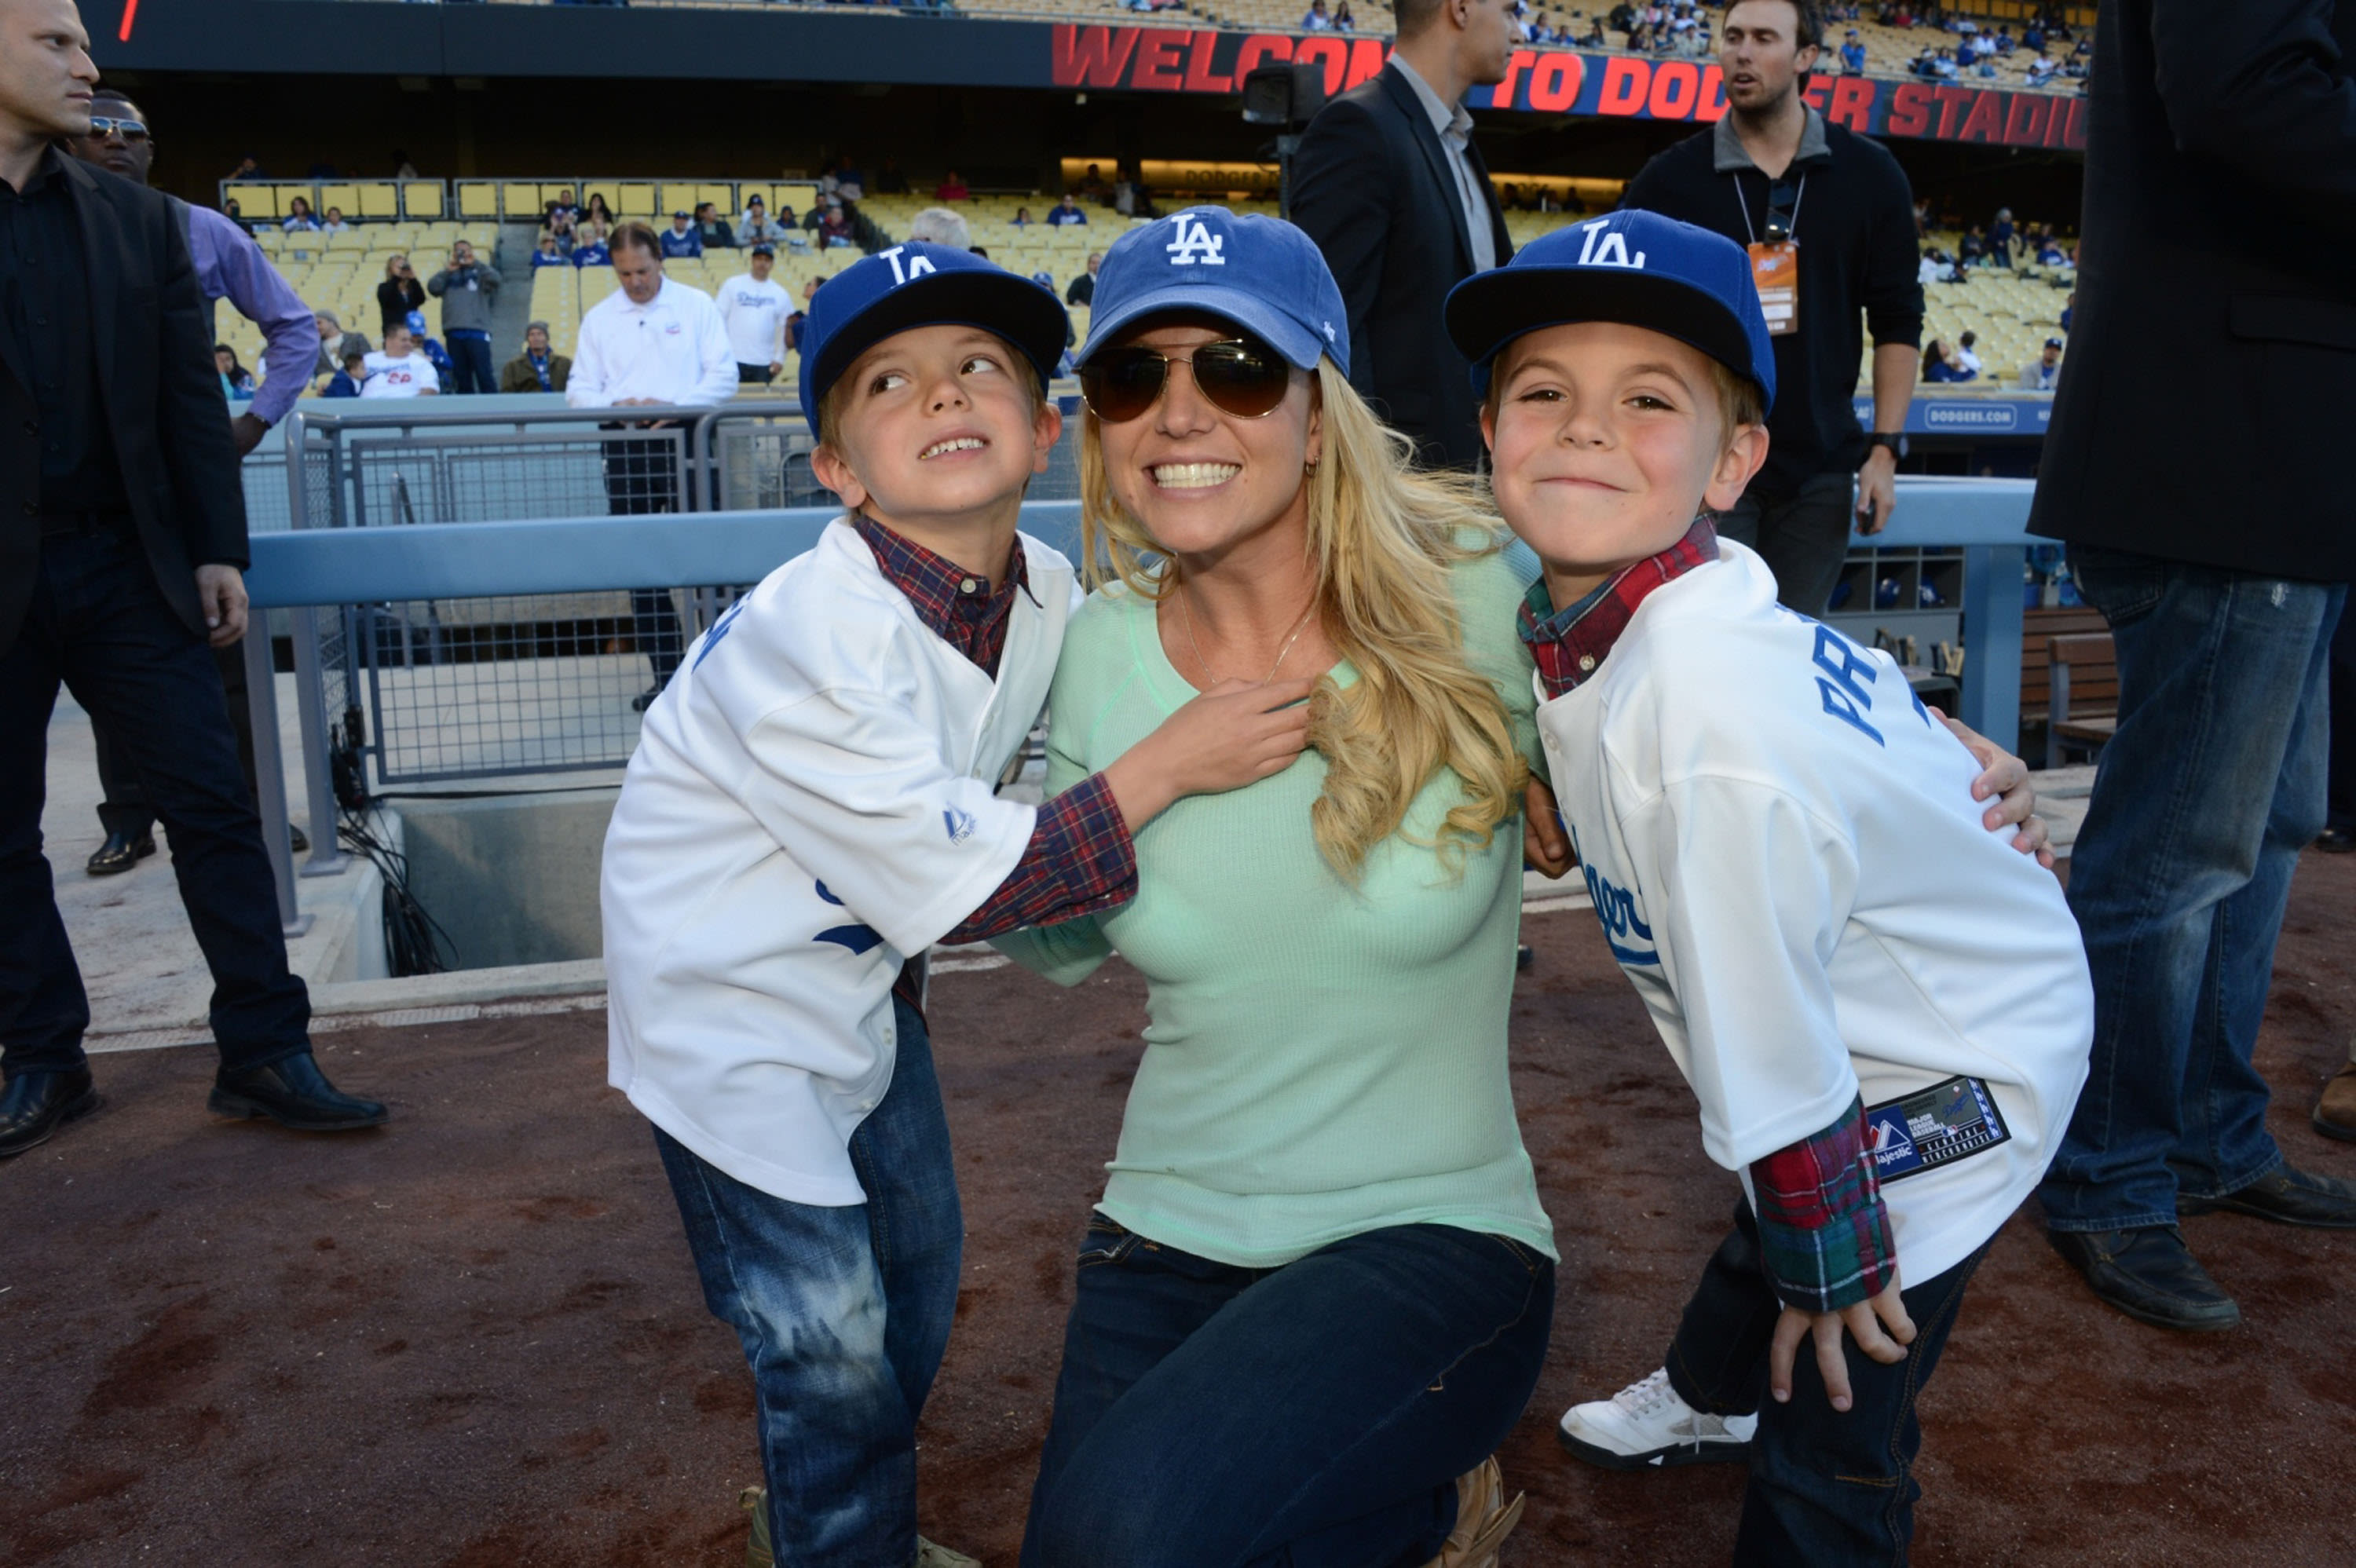 Who Are Britney Spears’ Kids? She Has 2 Sons With Ex Kevin Federline: Inside Their Relationship